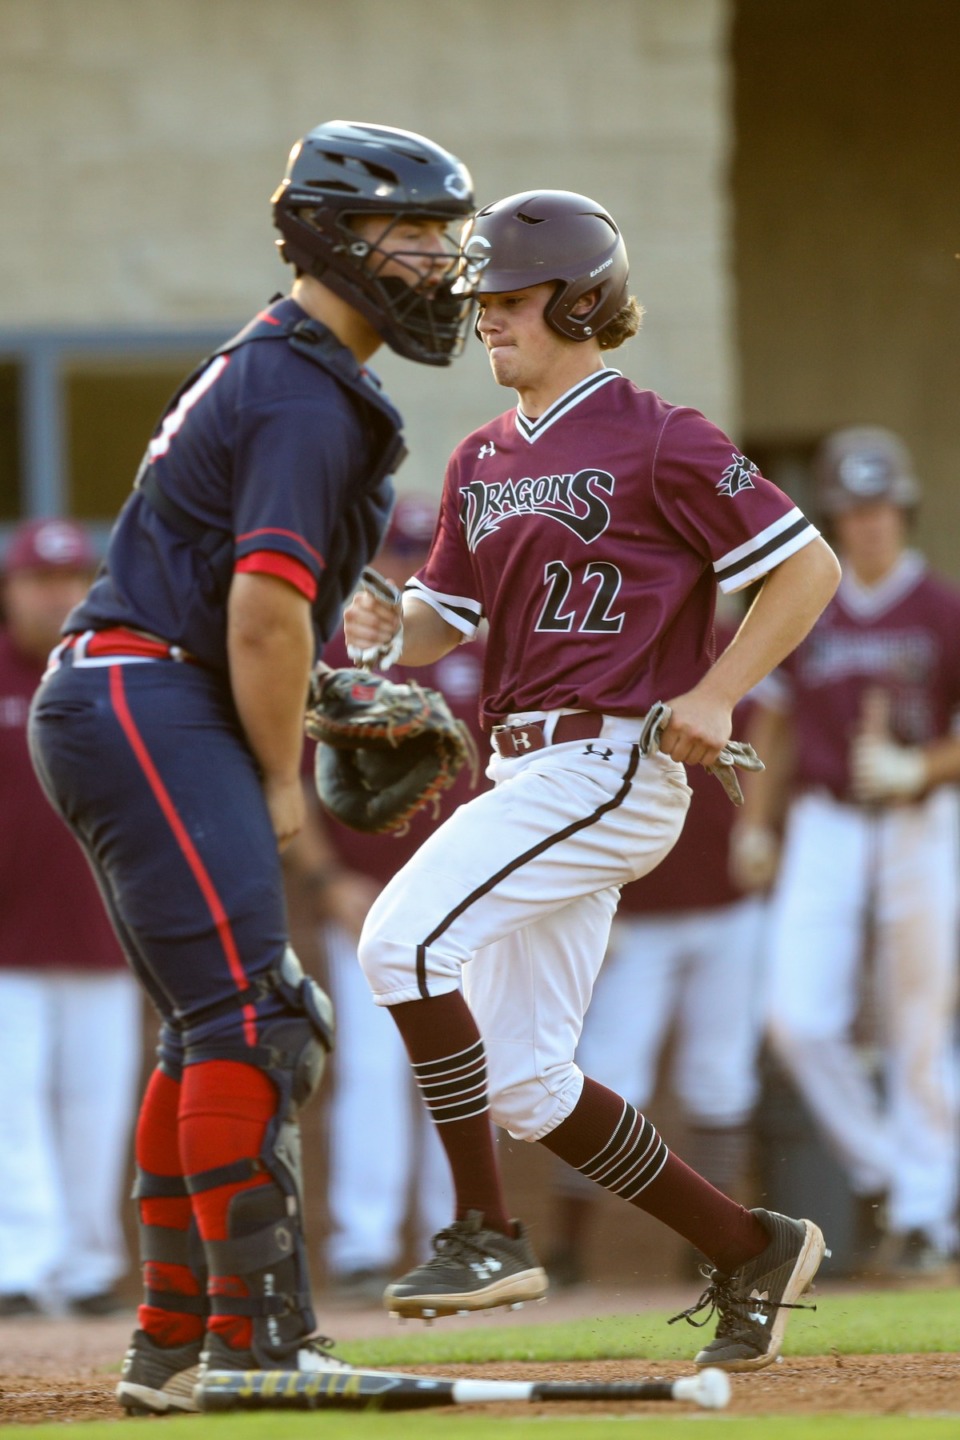 <strong>Collierville&rsquo;s Braden Sheals scores a home run during the game against the Henry County Patriots on Friday, May 20, 2022.</strong> (Justin Ford/ Special to The Daily Memphian)